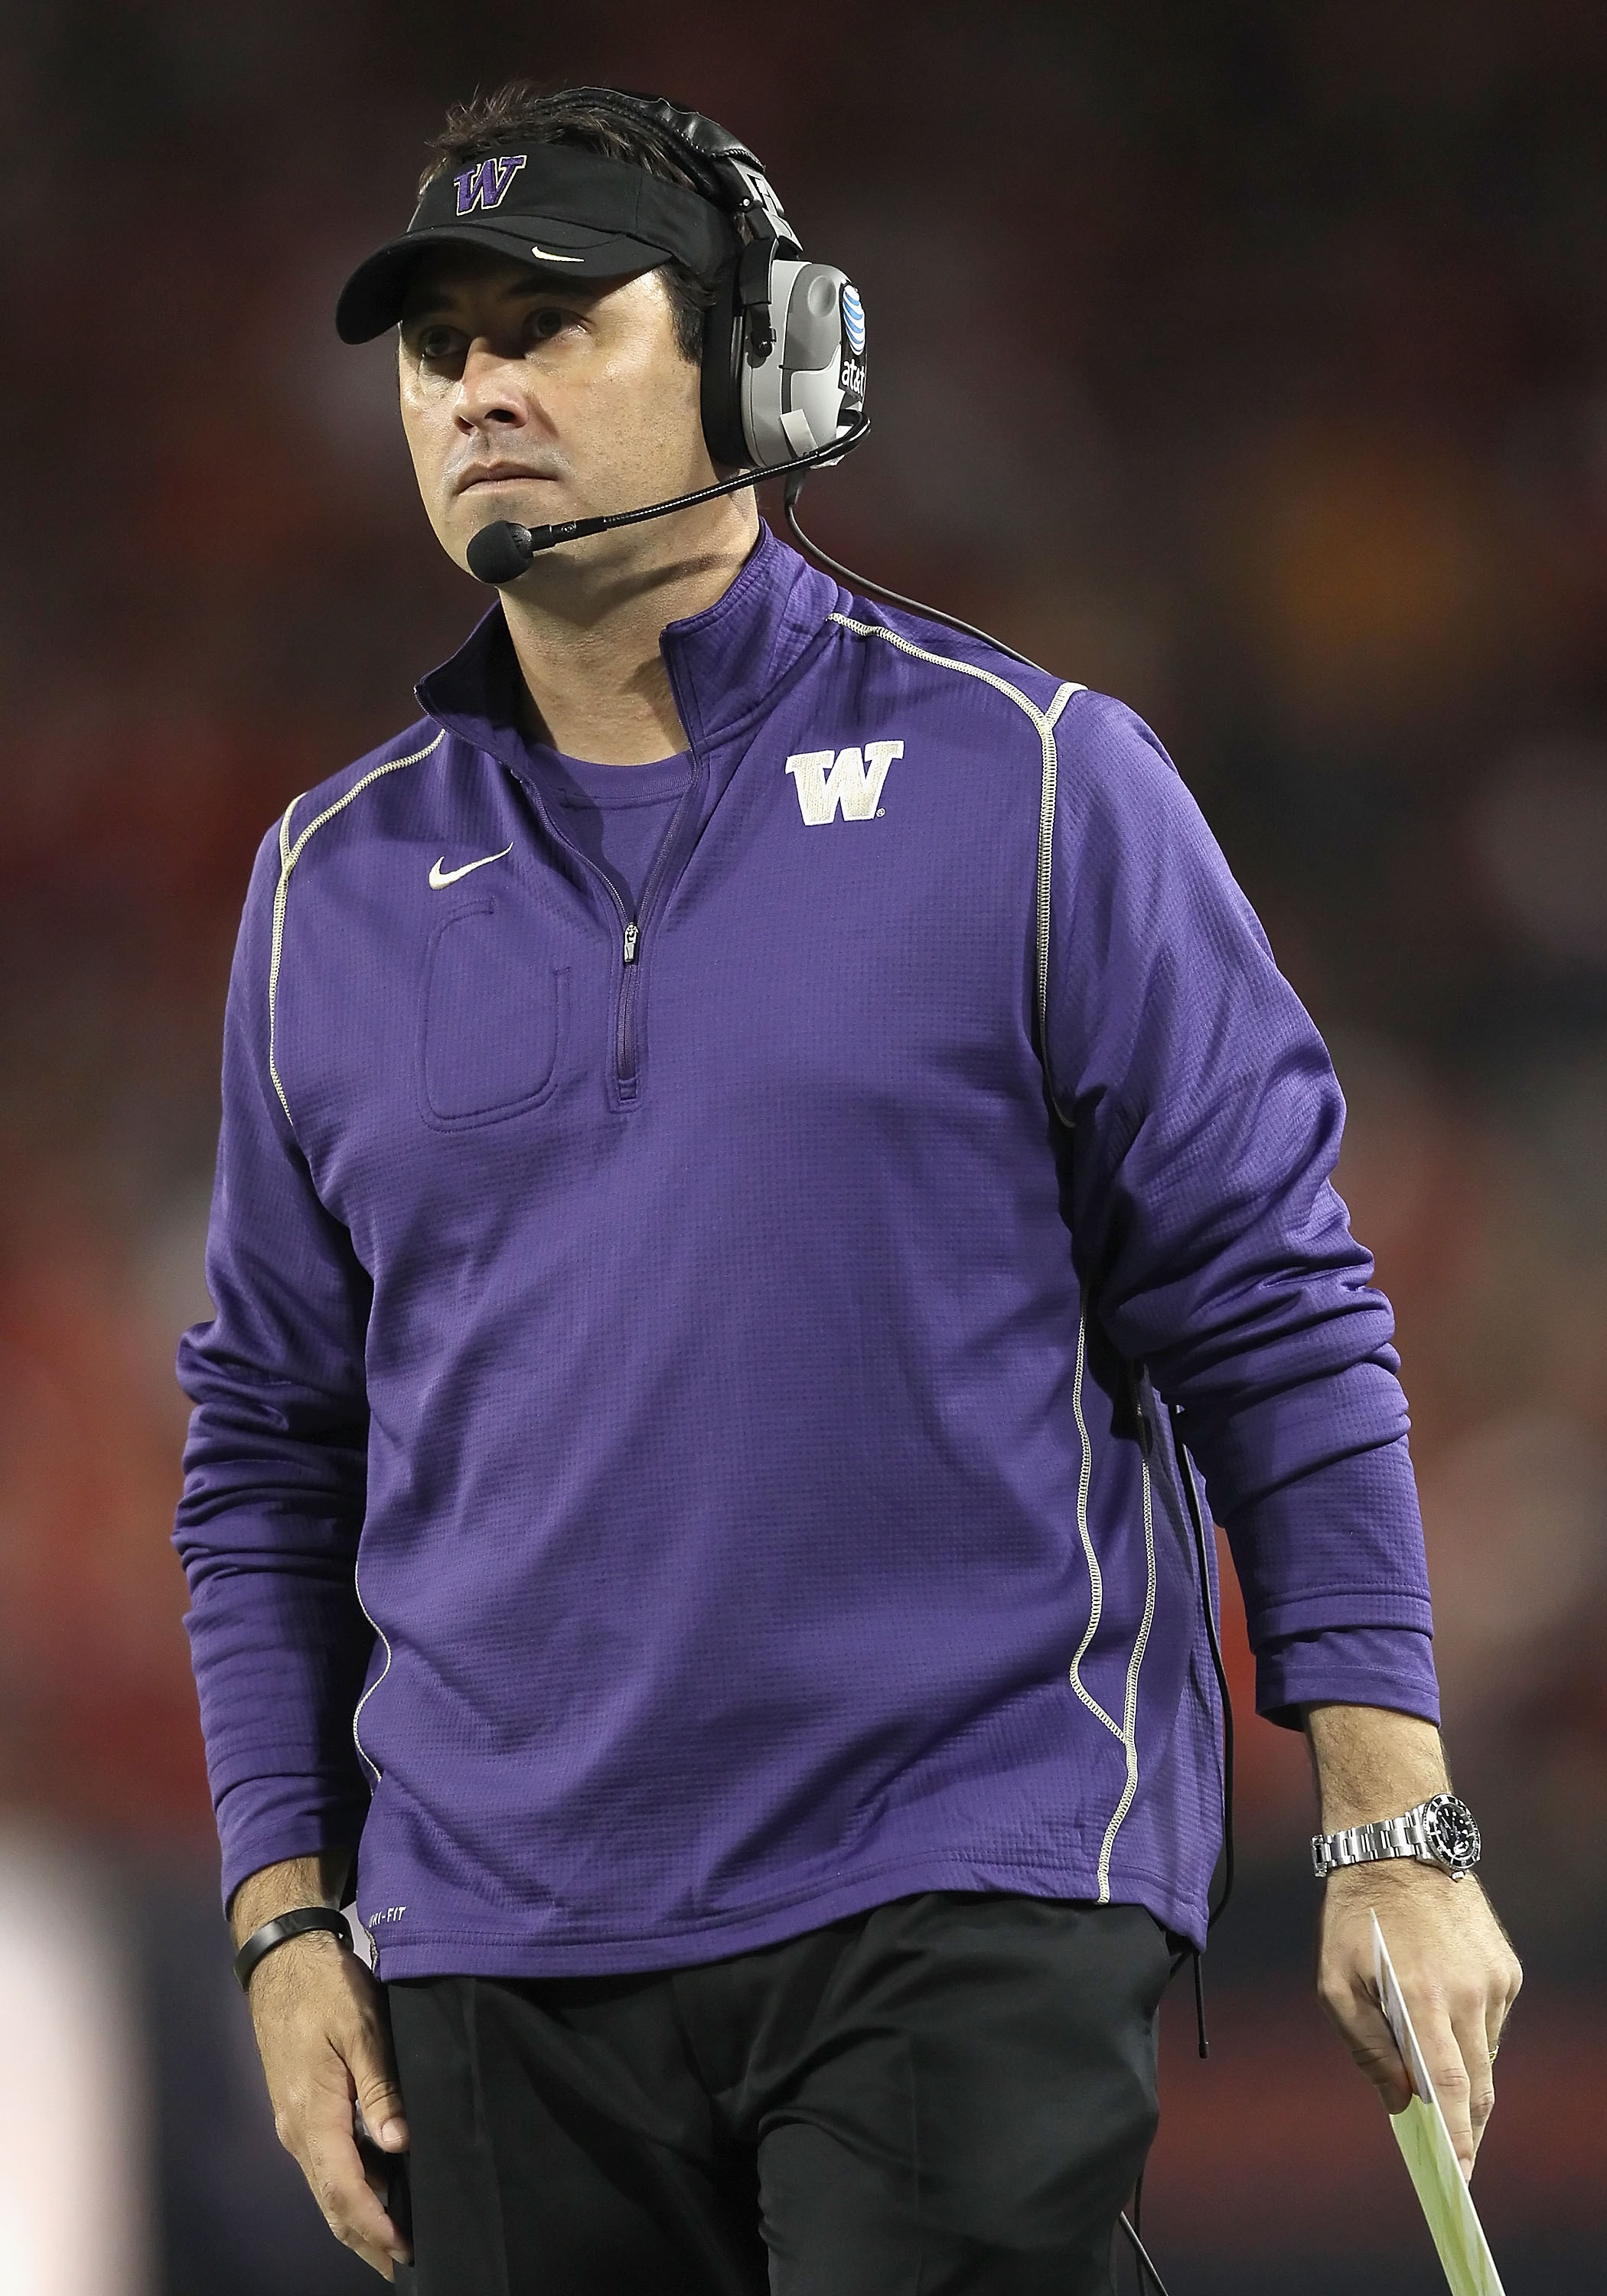 TUCSON, AZ - OCTOBER 23:  Head coach Steve Sarkisian of the Washington Huskies during the college football game against the Arizona Wildcats at Arizona Stadium on October 23, 2010 in Tucson, Arizona.   The Wildcats defeated the Huskies 44-14.  (Photo by C